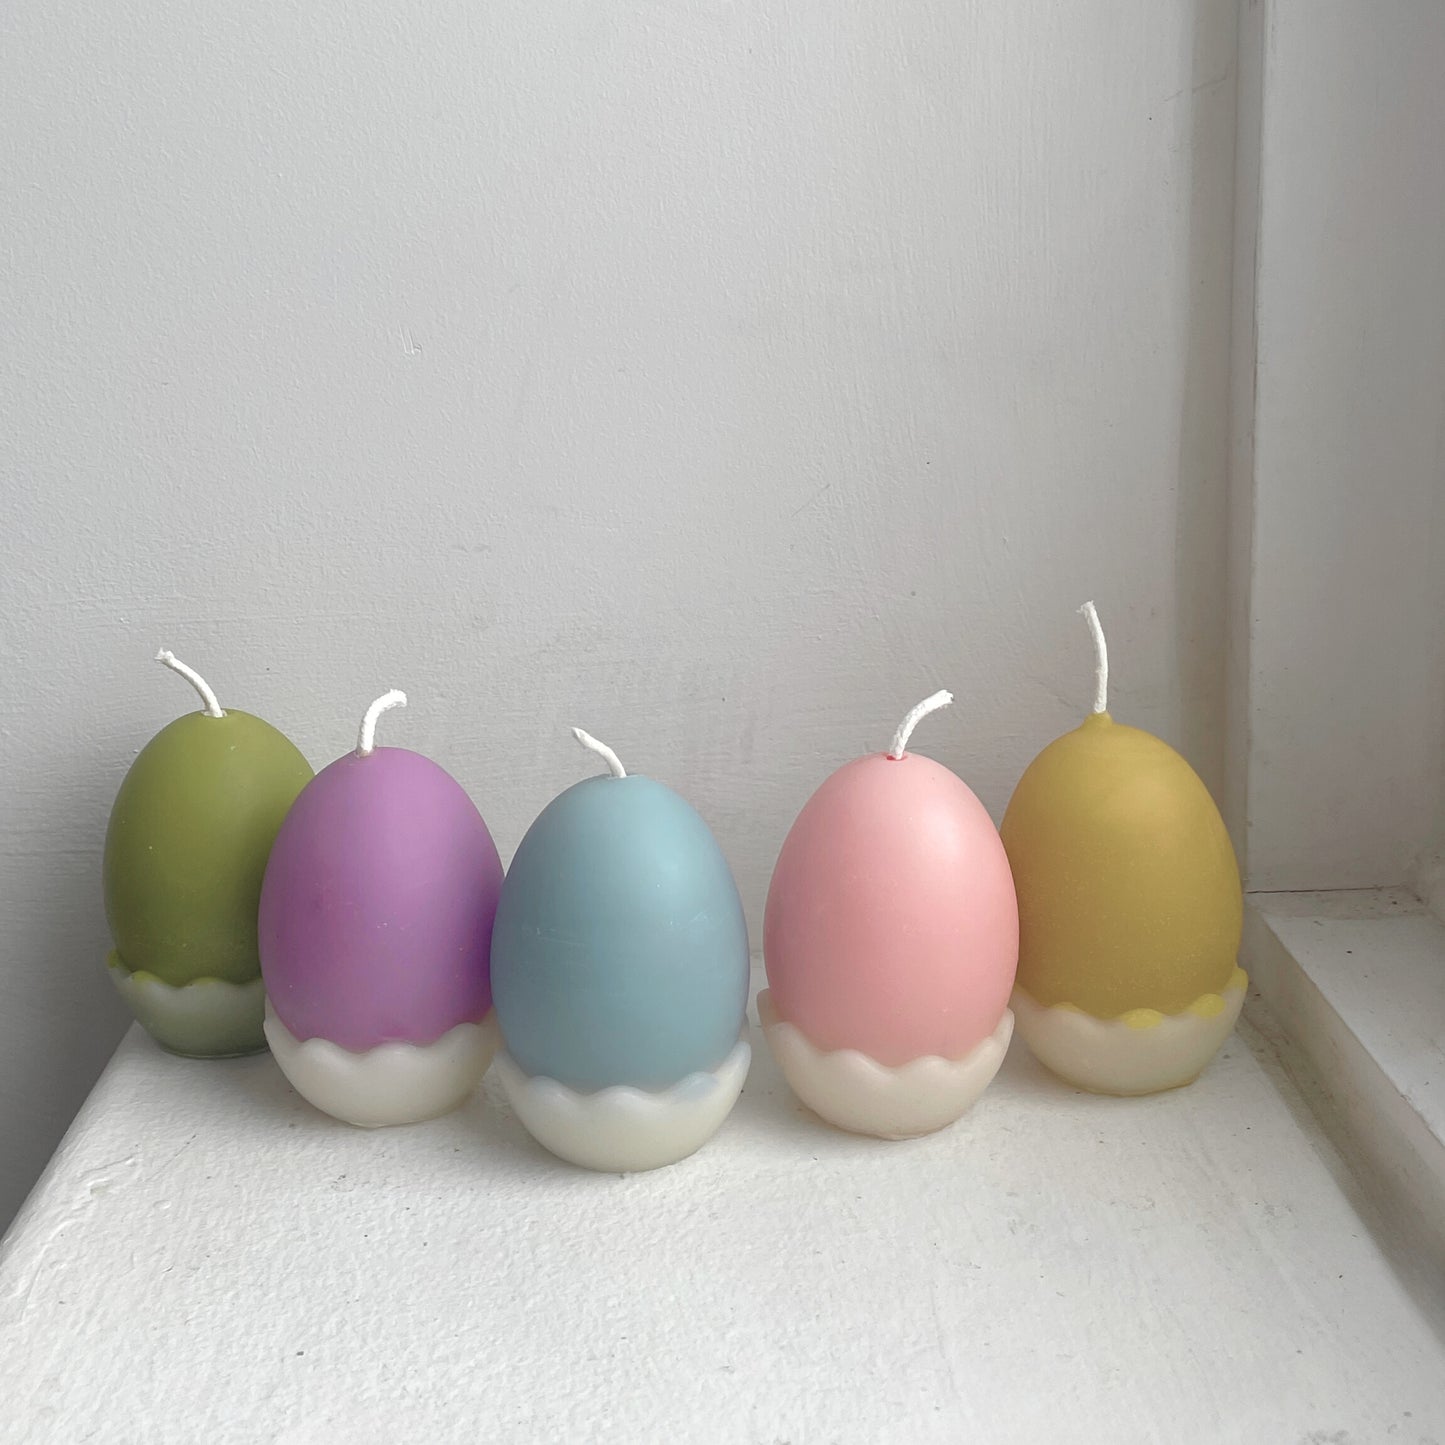 Beeswax EGG candles - large 100% beeswax candle / PASTELS / eggs / Easter eggs / beeswax candle